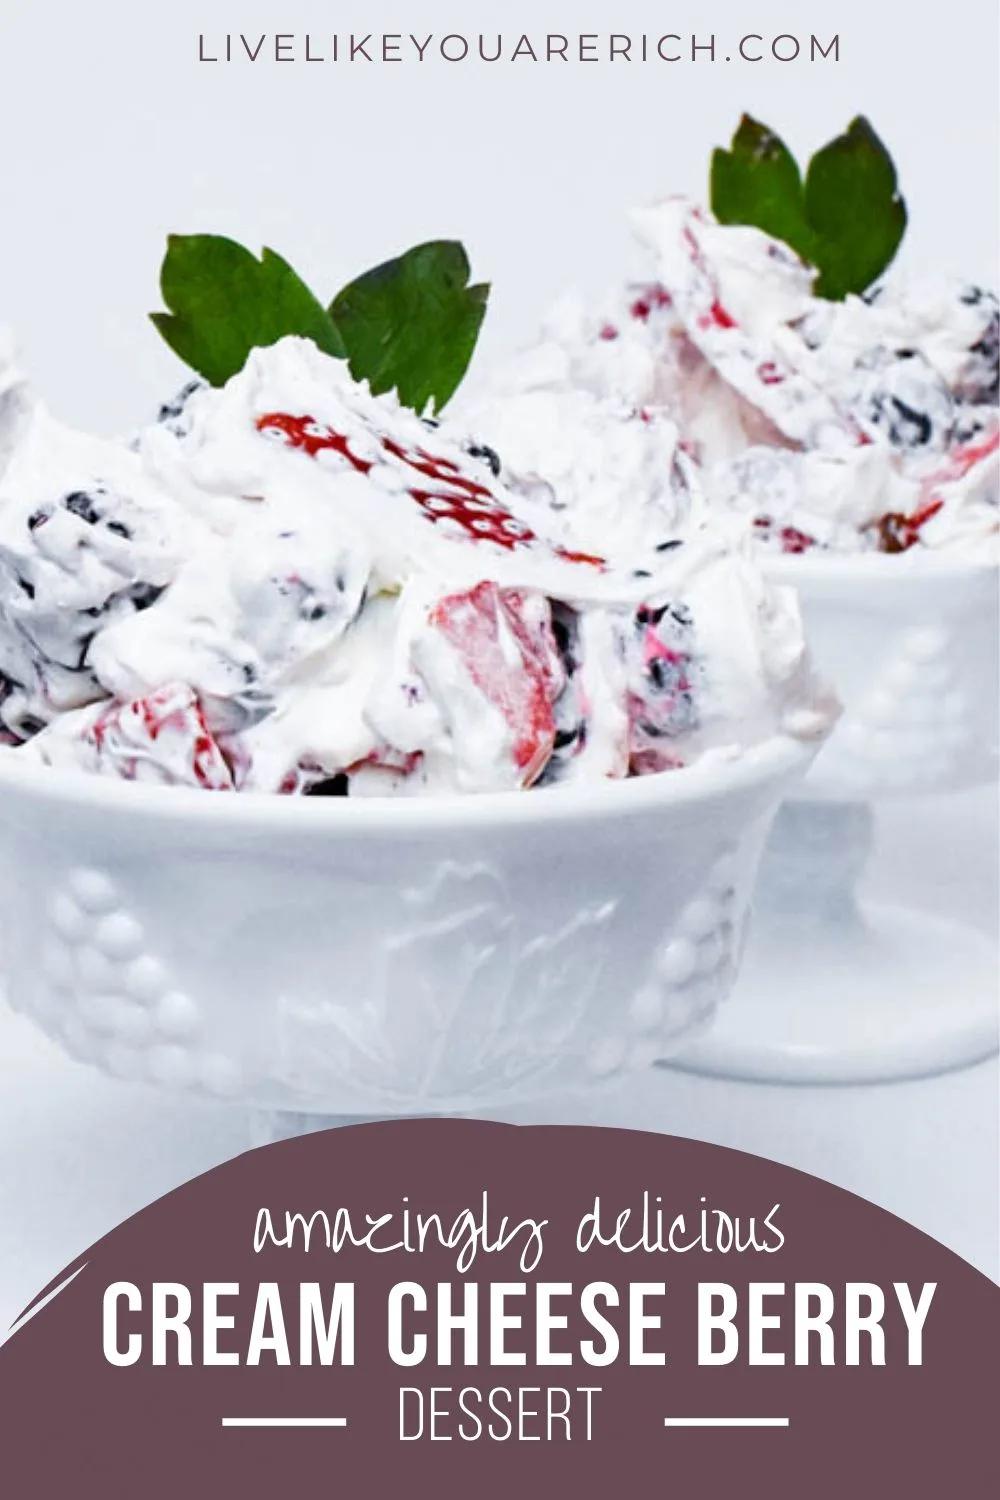 This Amazingly Delicious Cream Cheese Berry Dessert is made of fresh fruit further sweetened with pure vanilla extract, powdered sugar, and cool whip. To balance out the sweet, the cream cheese gives the dessert a delicious depth of flavor. Top it off with graham cracker crumbs for additional texture and flavor. #berrydessert #dessert 